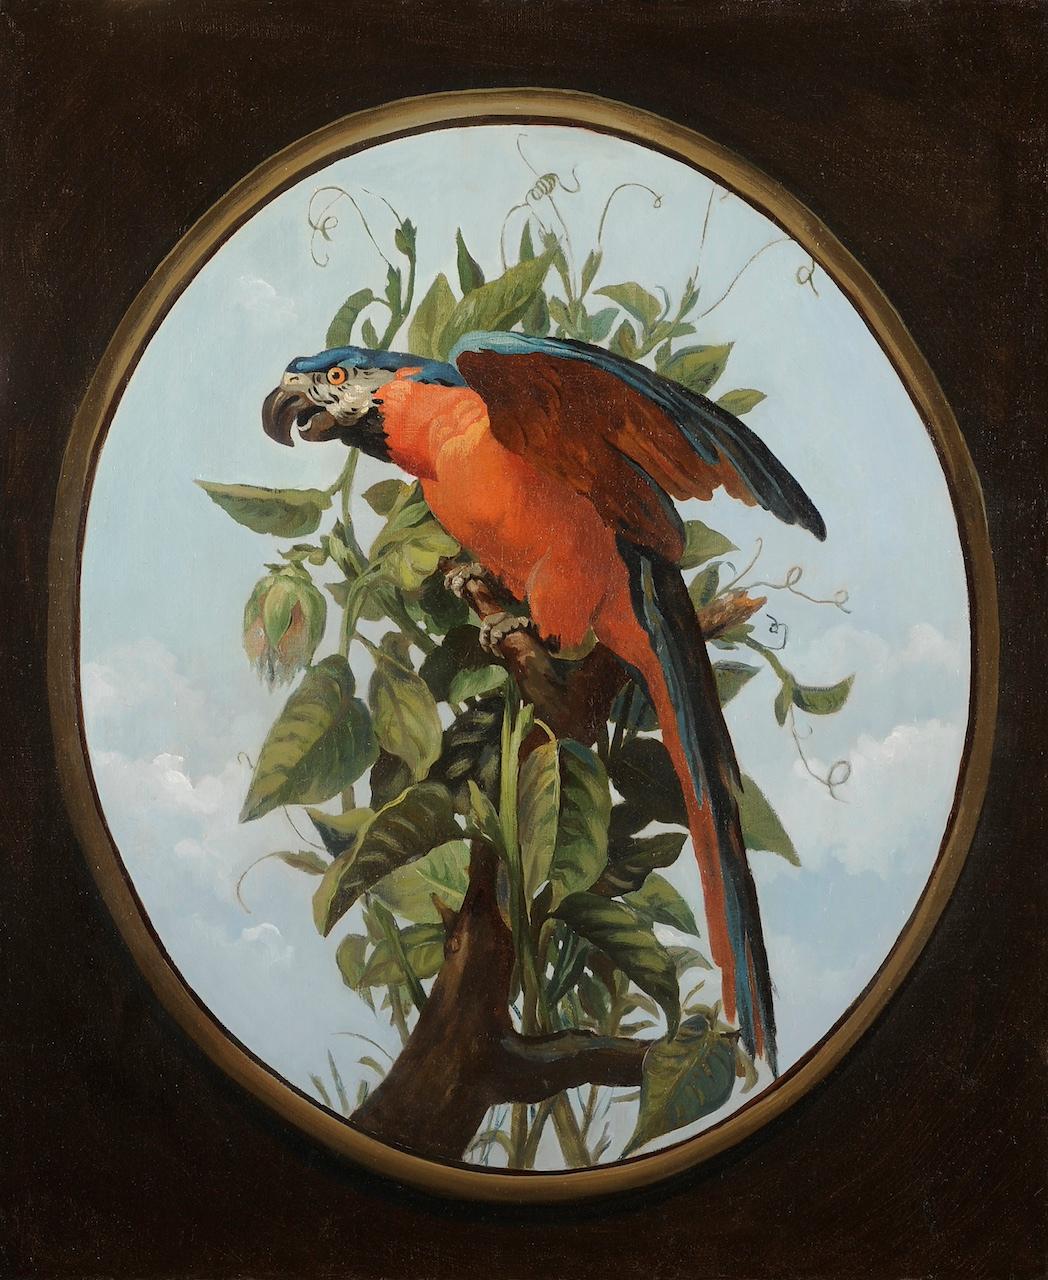 Blue macaw perched on a branch - Painting by Jean-Baptiste Oudry